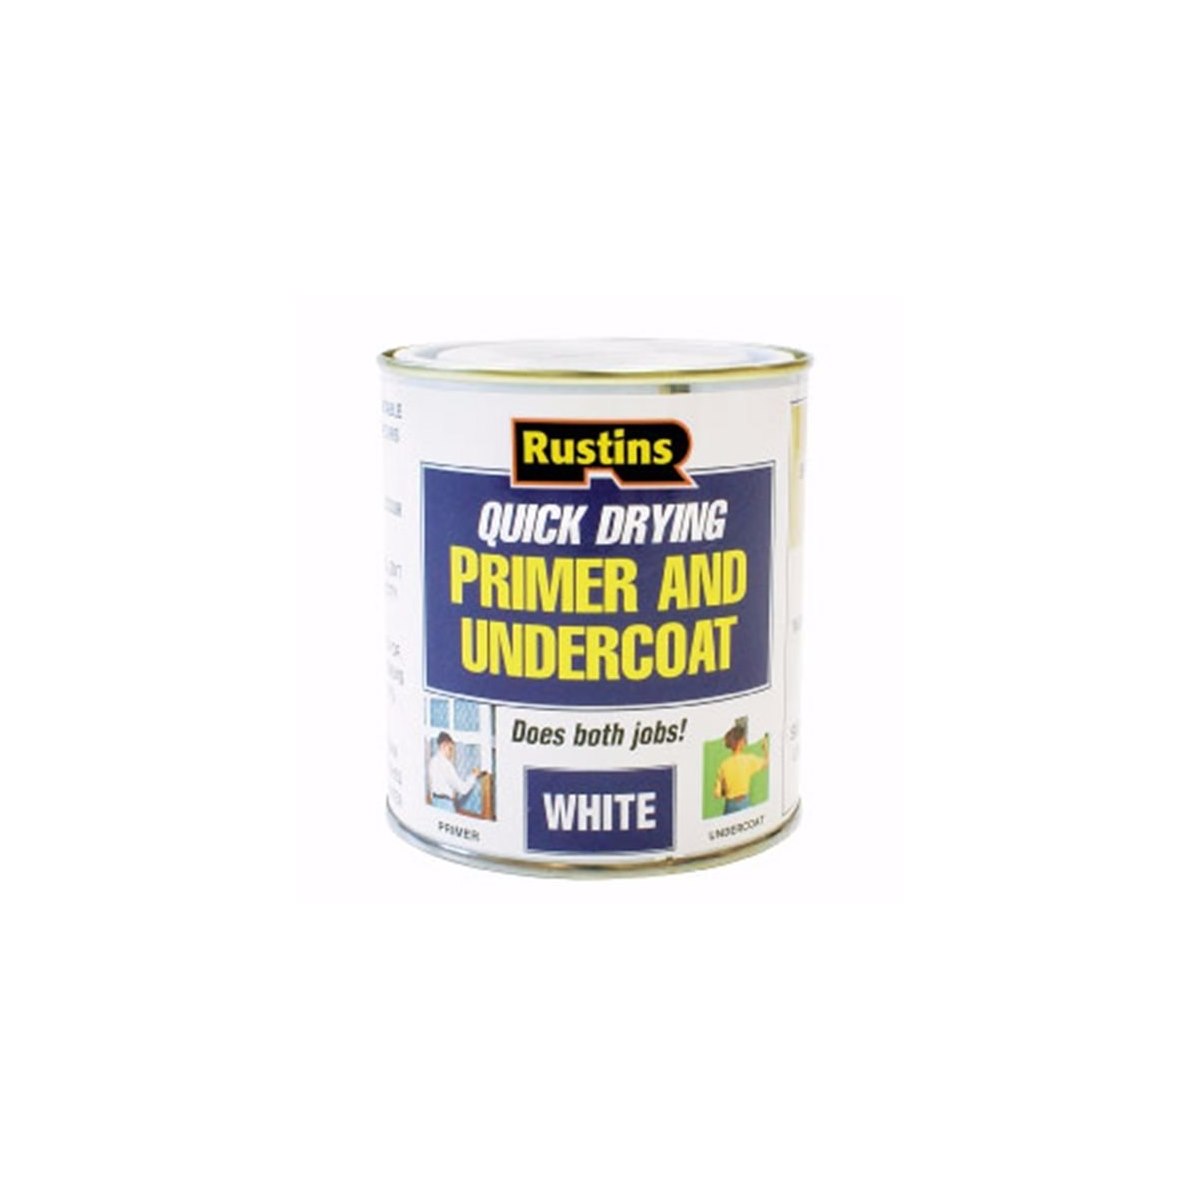 Rustins Quick Drying White Primer and Undercoat 1 Litre